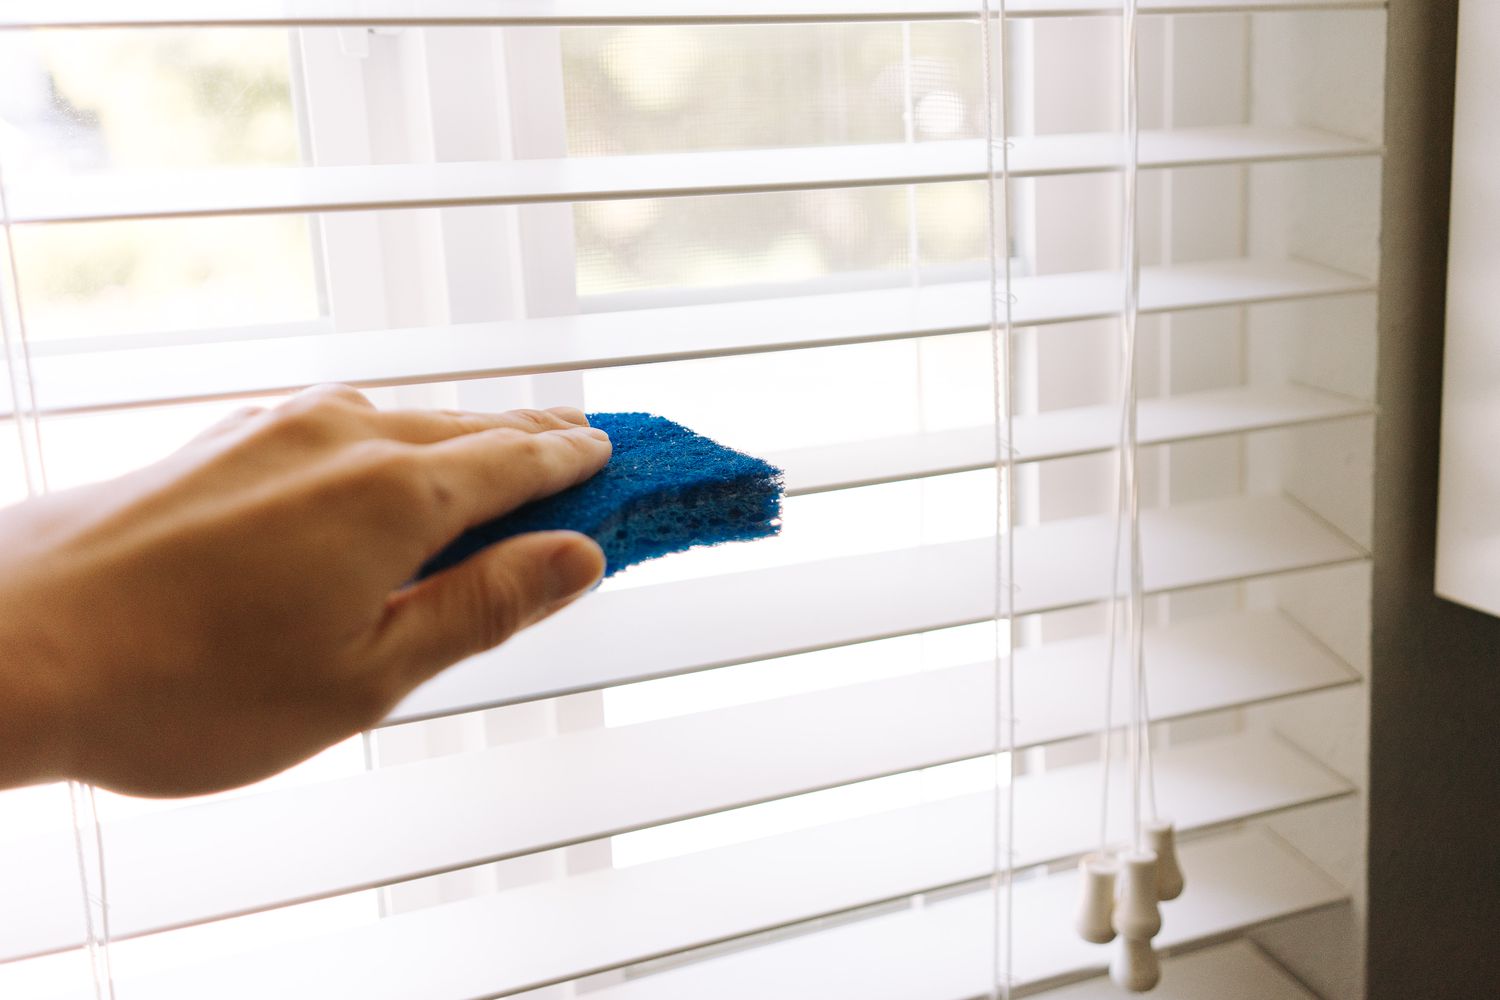 How to clean and maintain blinds in interior design?